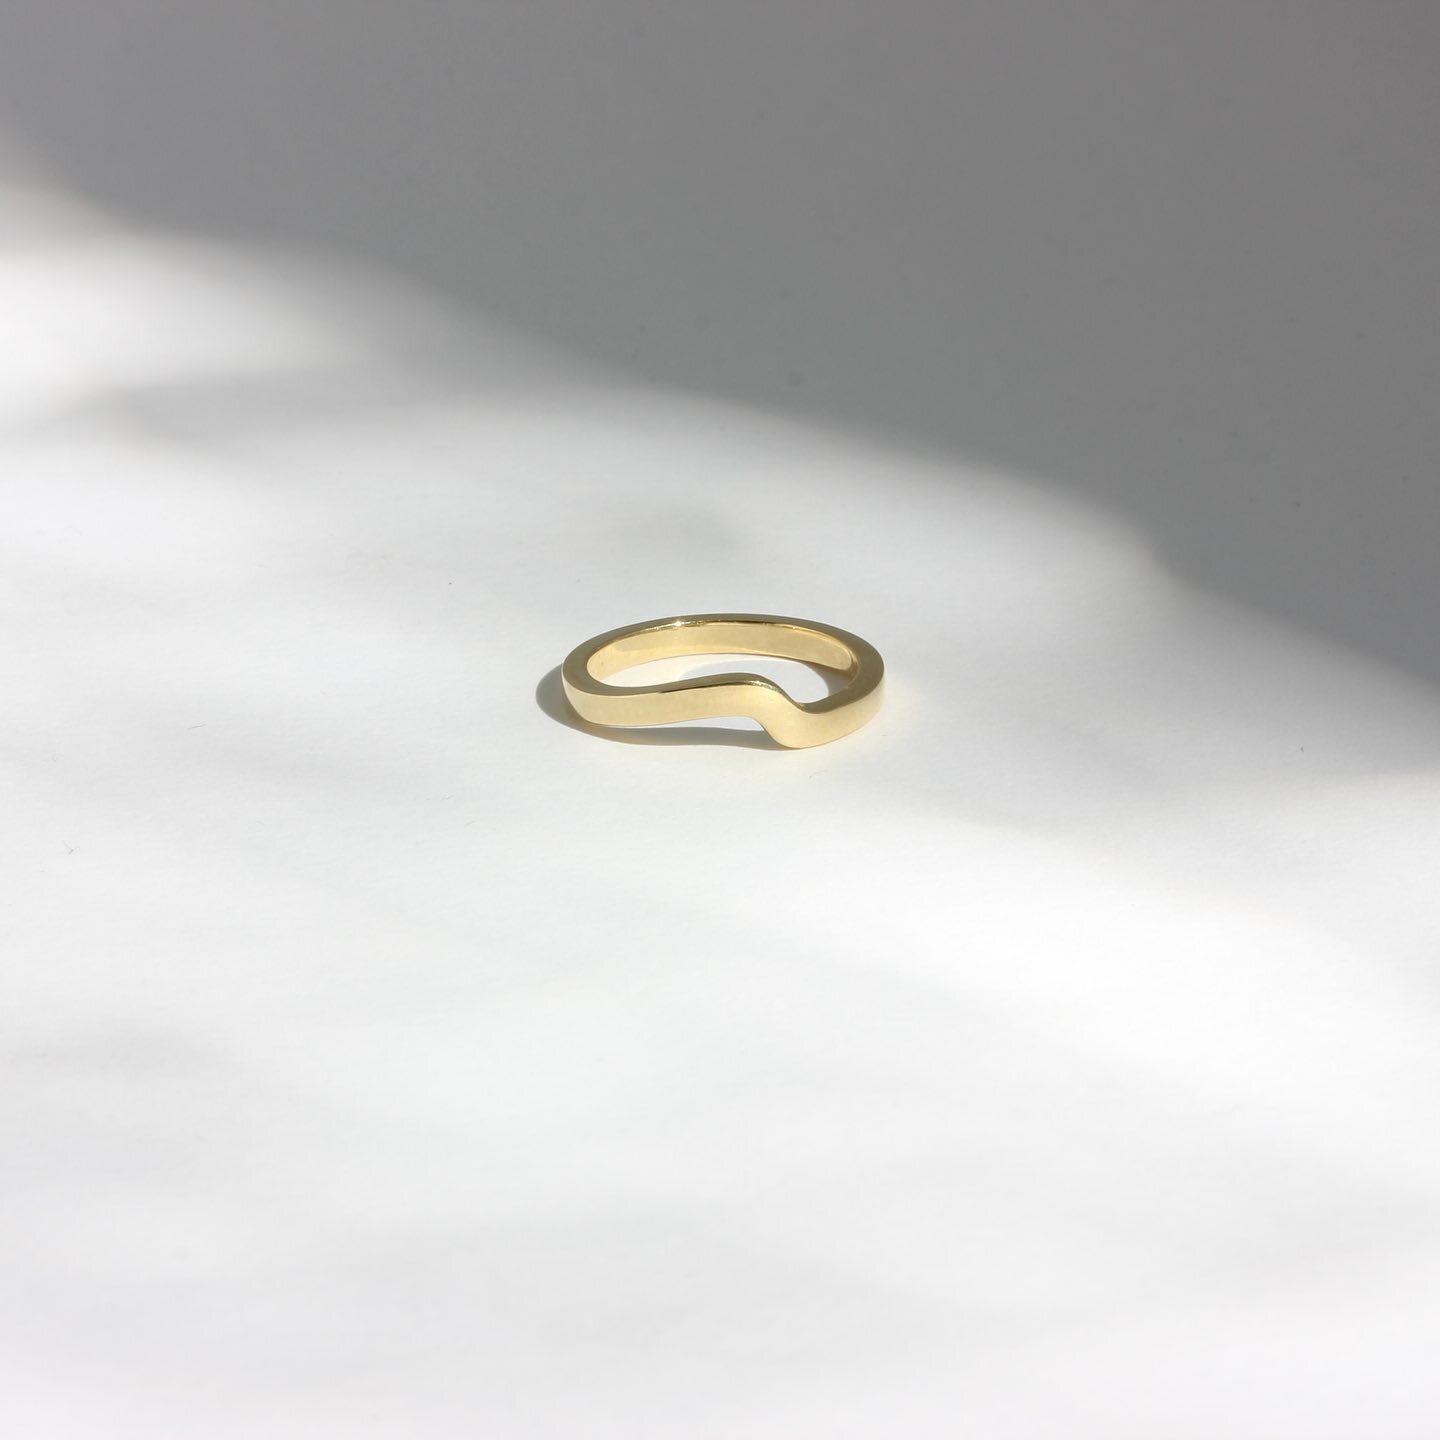 It&rsquo;s wedding ring central in the studio at the moment &amp; they are still one of my favourite things to create 🔗
Not sure how far in advance you need to order? I&rsquo;d always recommend allowing for a 4-6 week turnaround because I make them 